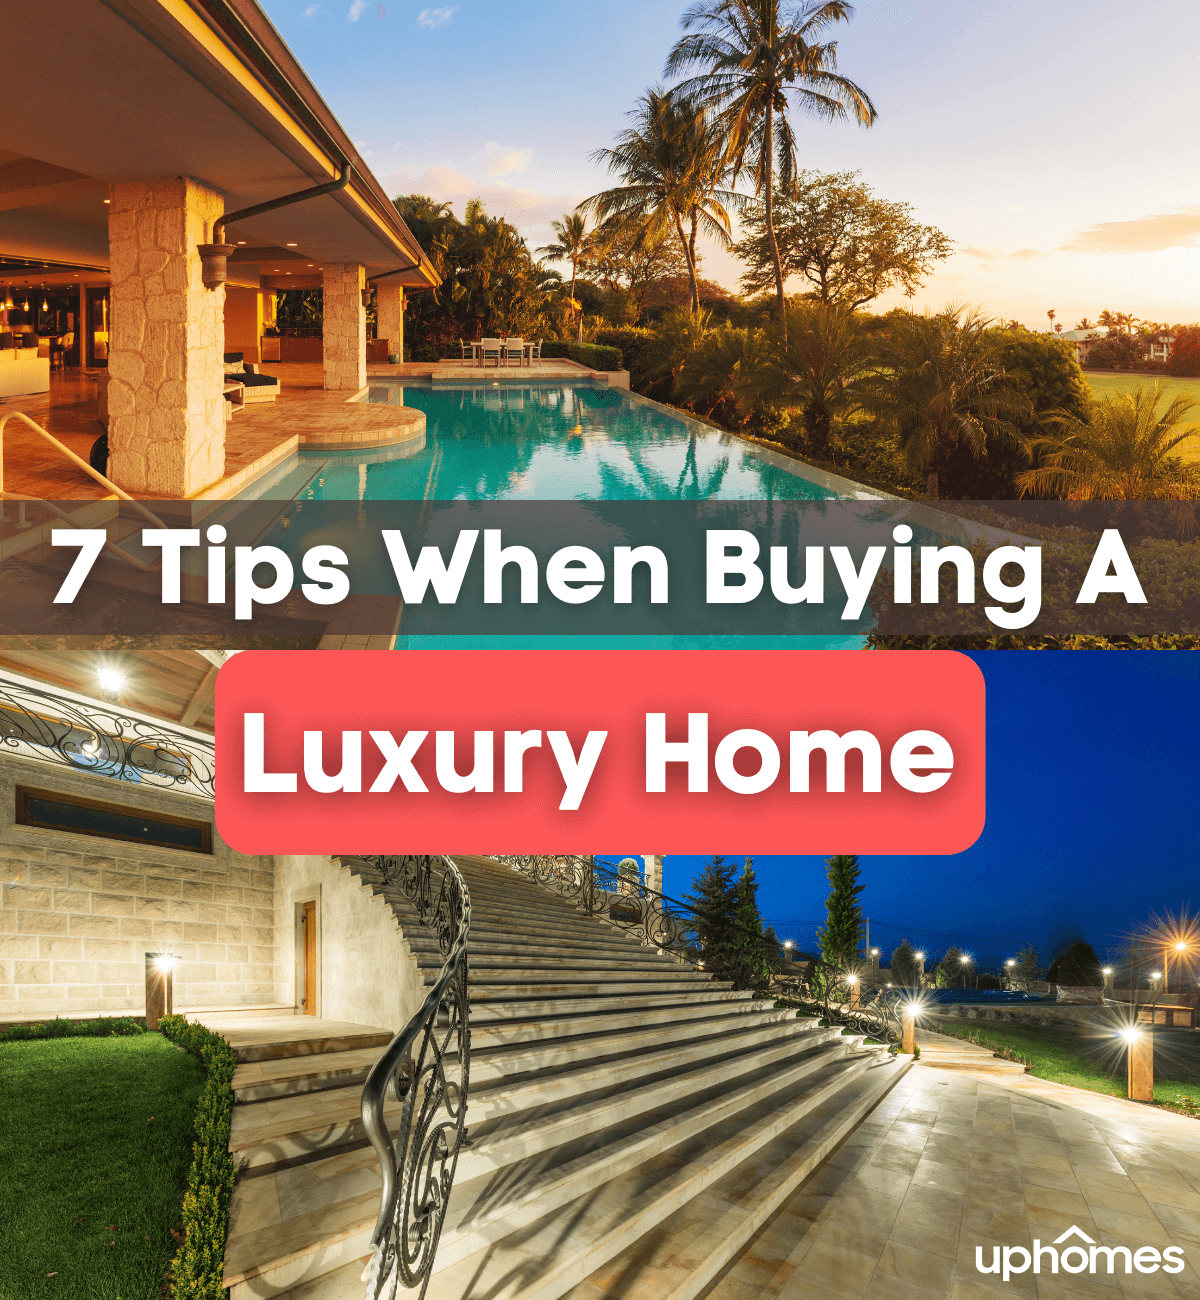 Buying a Luxury Home - What is a Luxury Home?